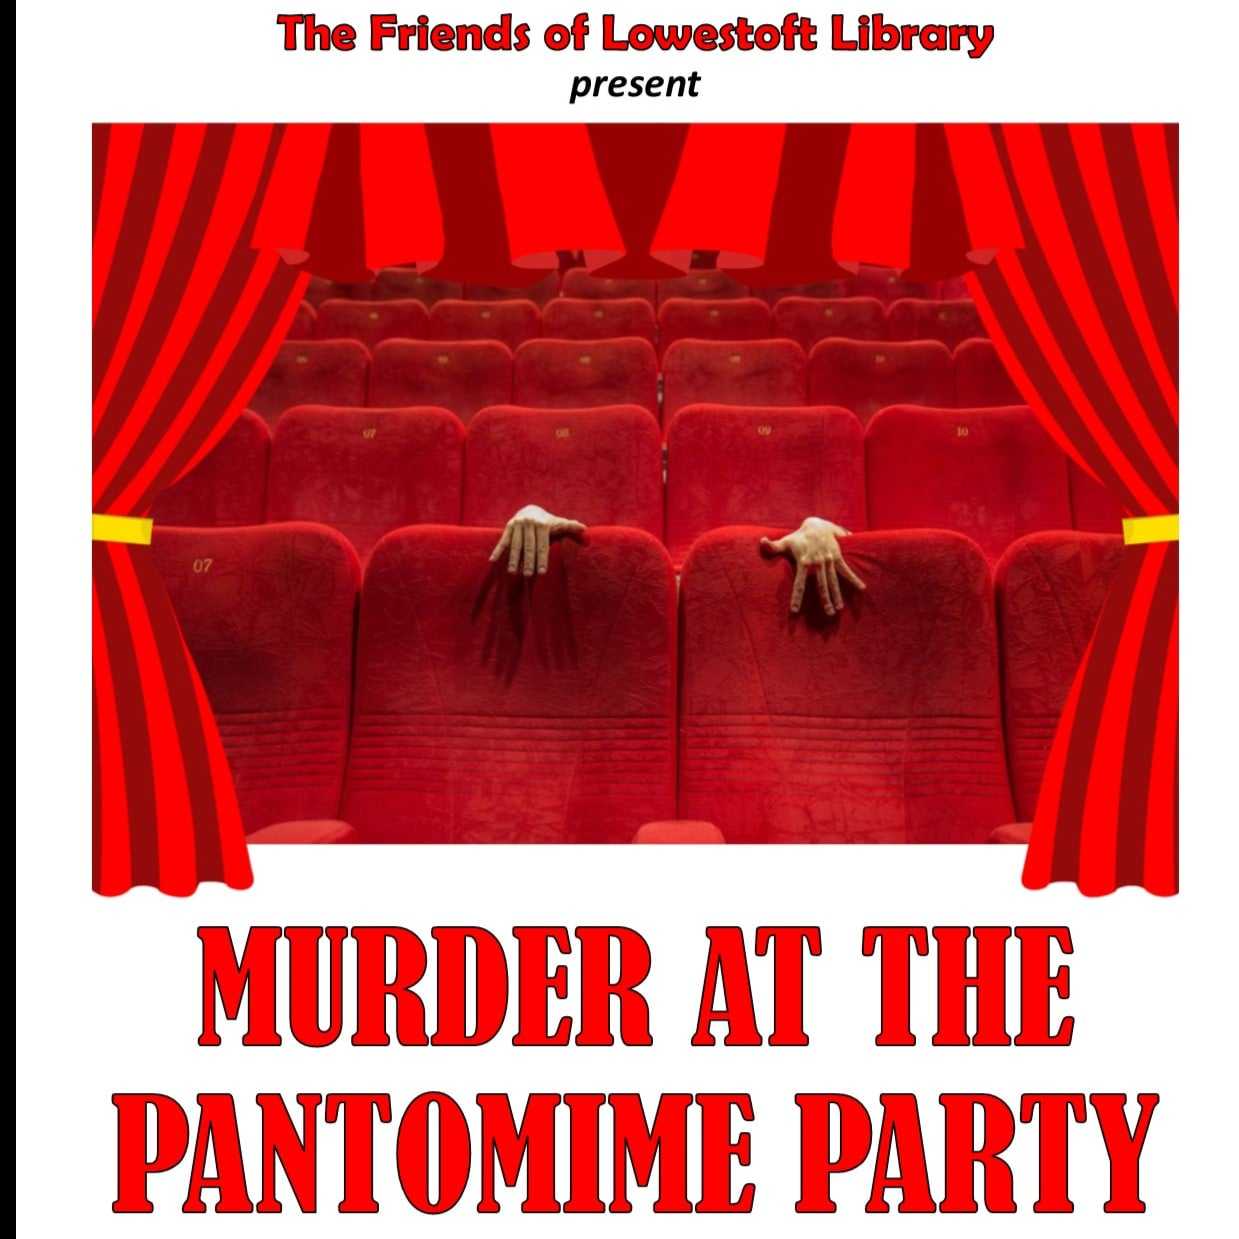 Murder at the pantomime party  Image